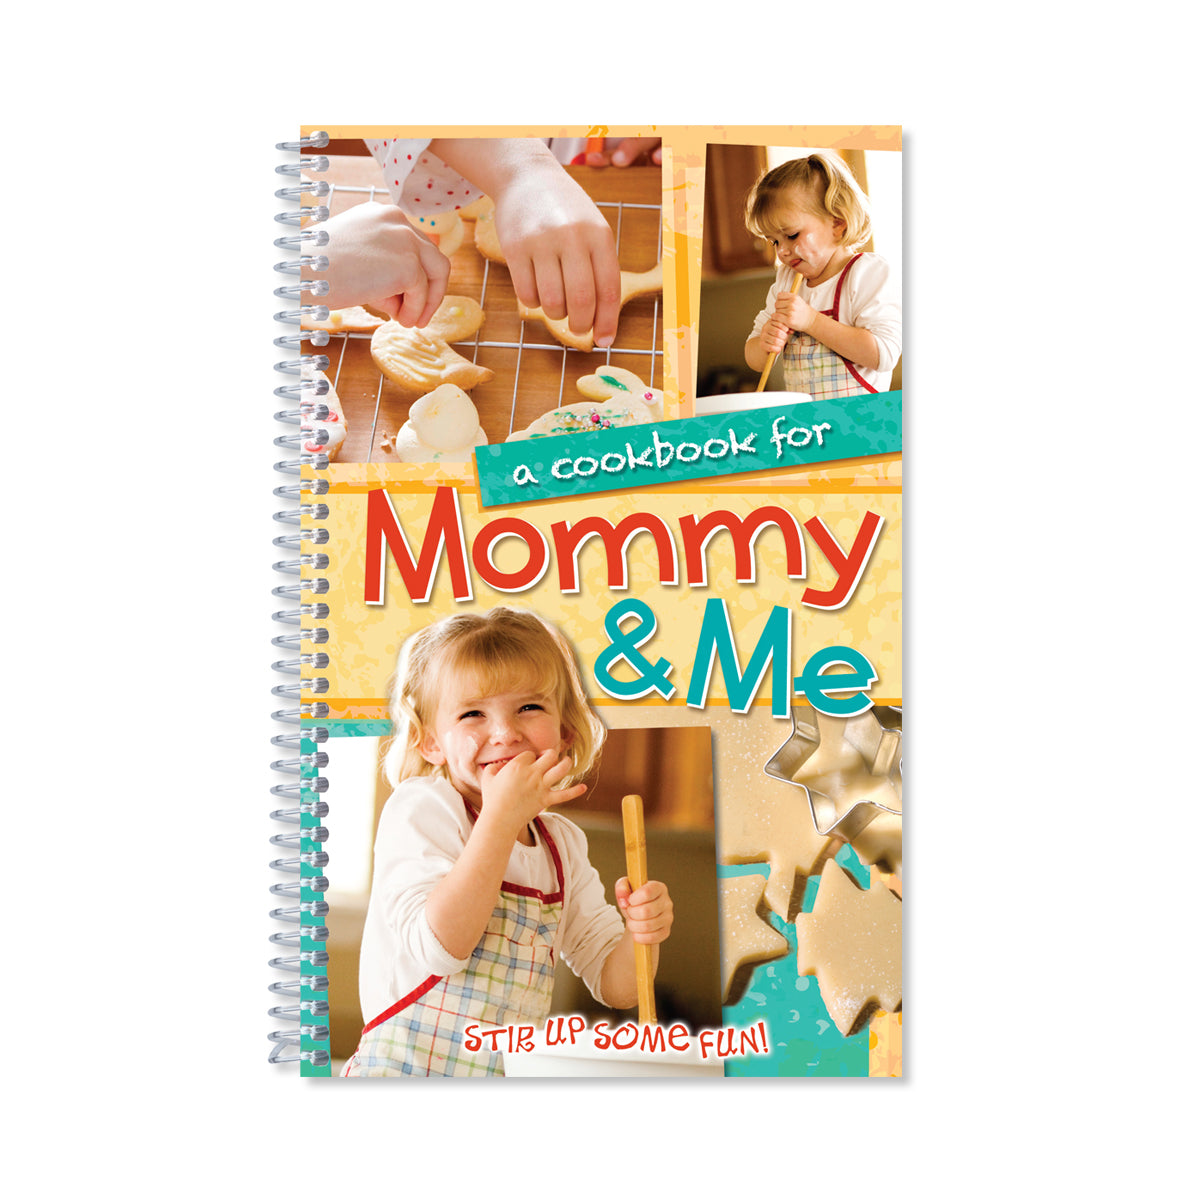 Cover of spiral bound cookbook A Cookbook for Mommy & Me - Stir up some fun! Cover shows a young girl mixing cookie dough.